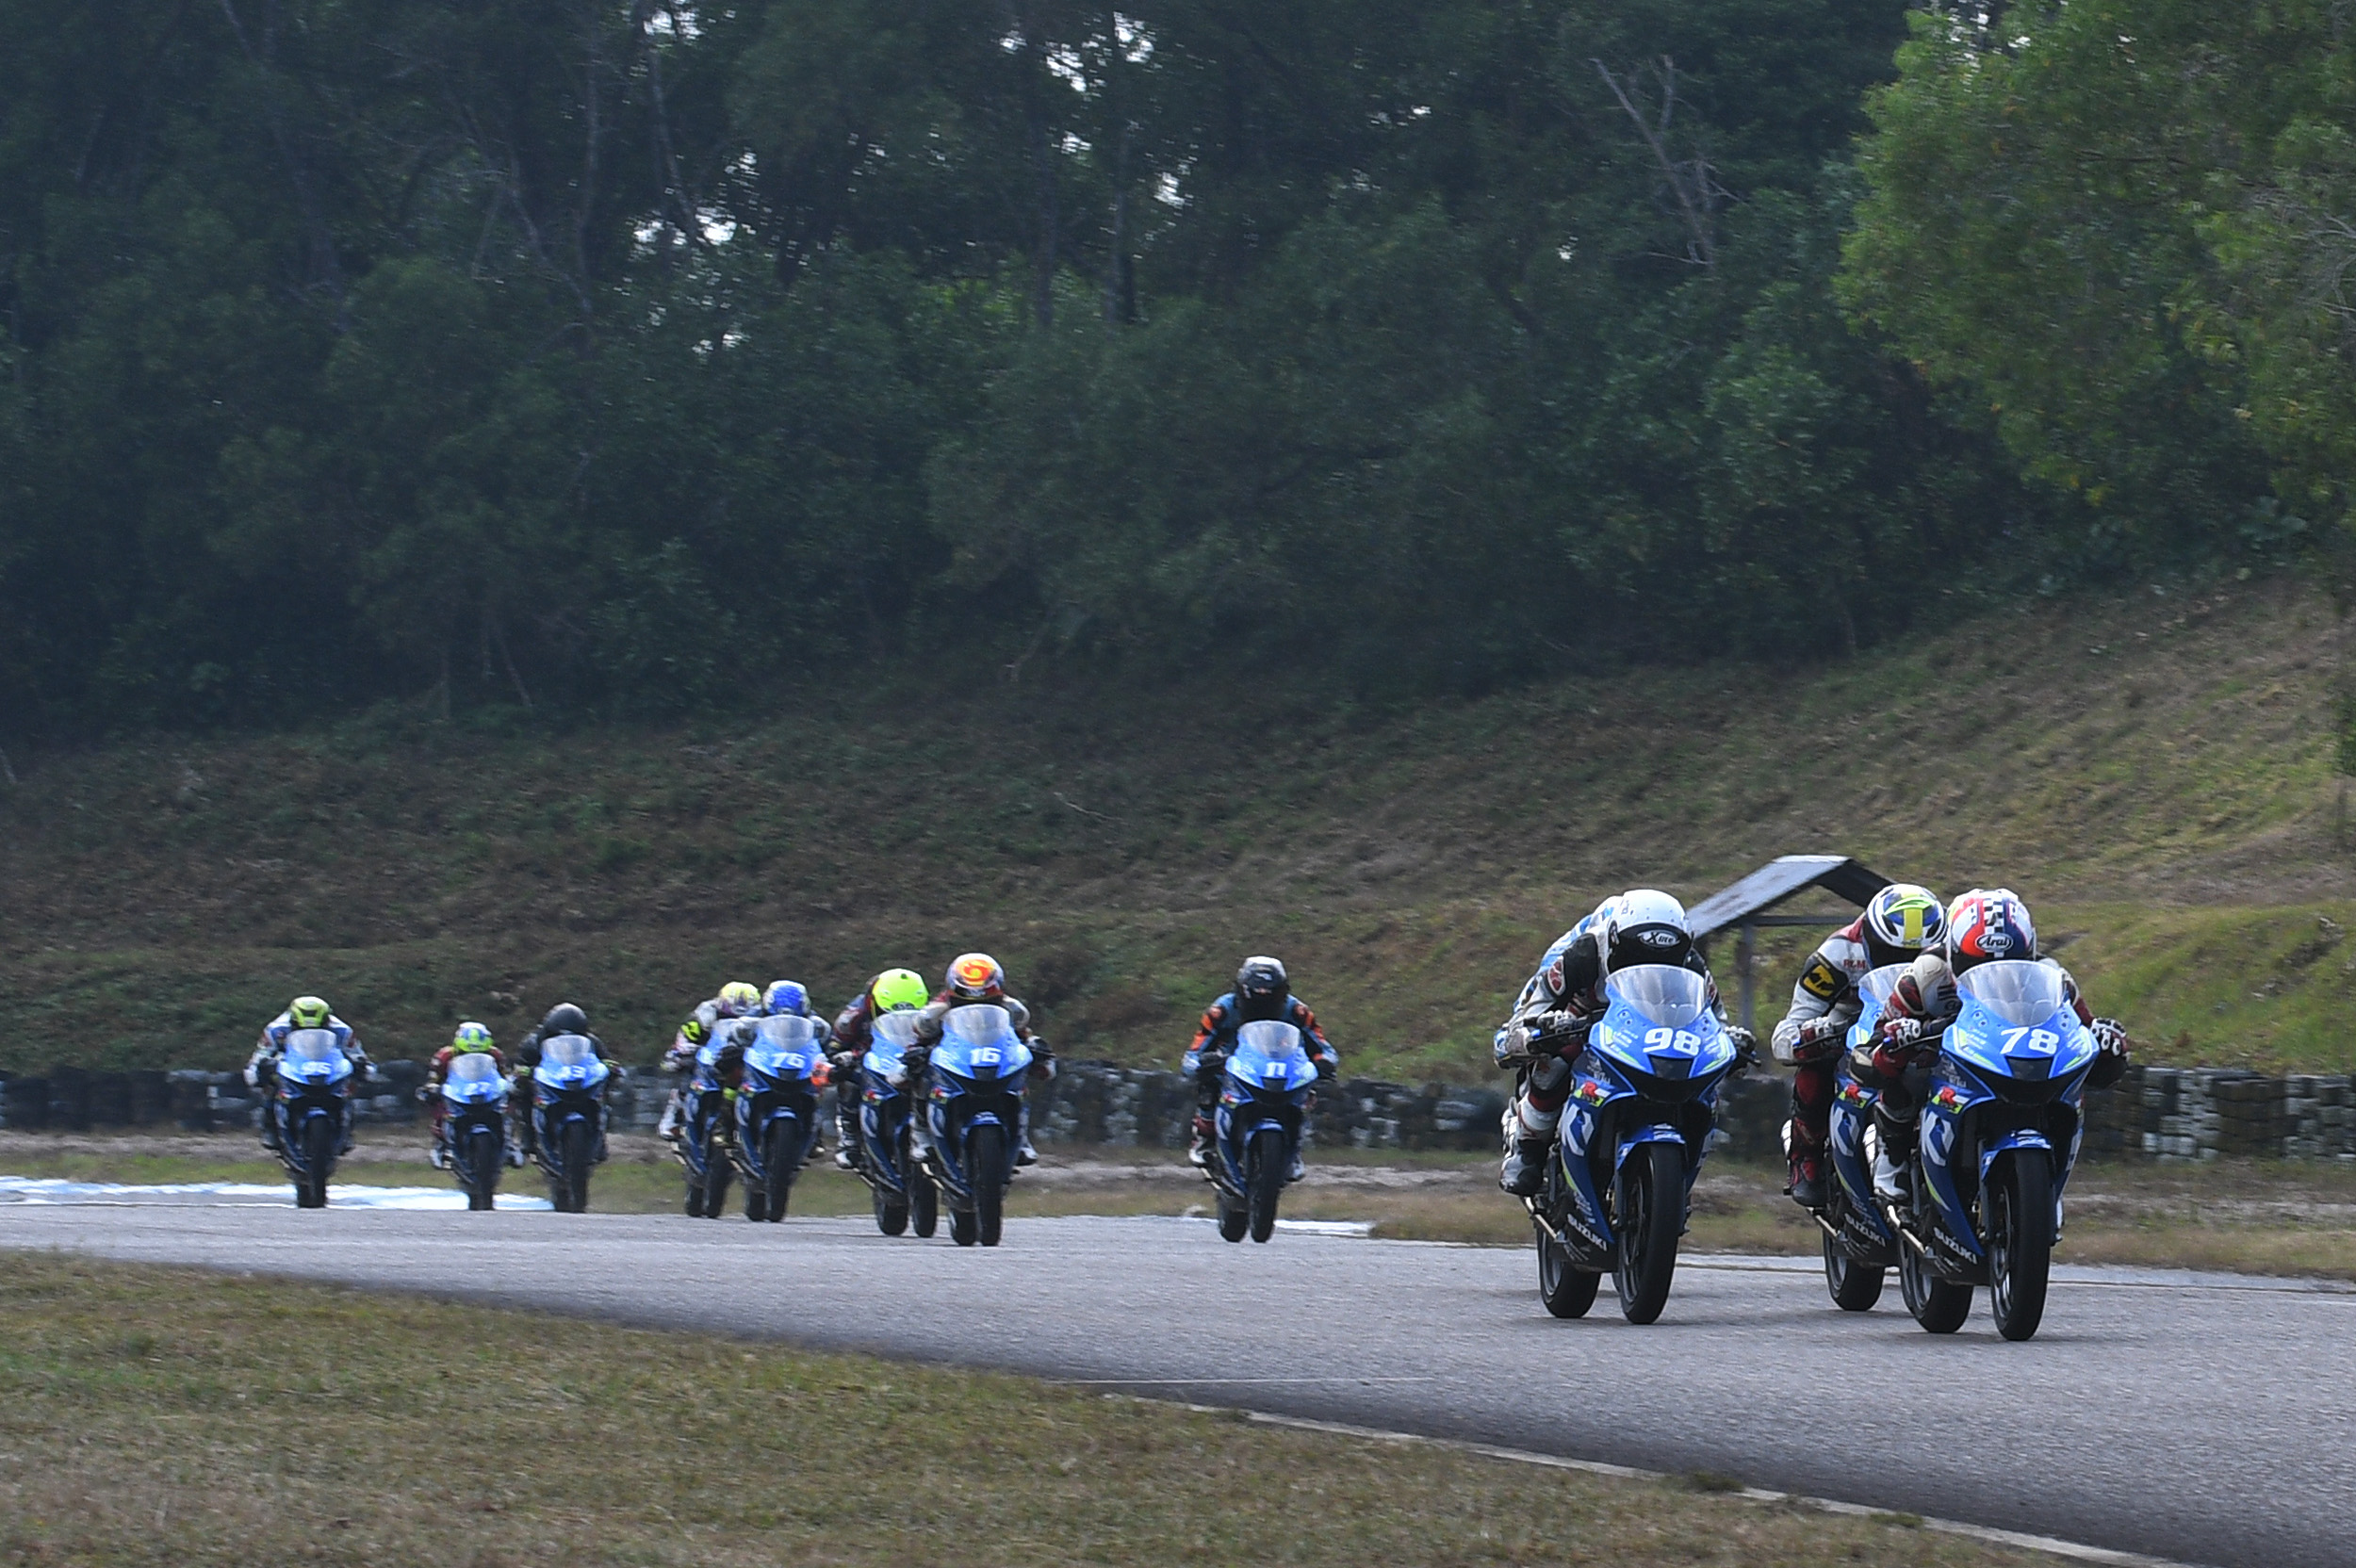 PRE-SEASON : SAC CONCLUDE WITH THE GSX-R150 SHOWING HIGHER POTENTIAL THAN ITS PREDECESSOR